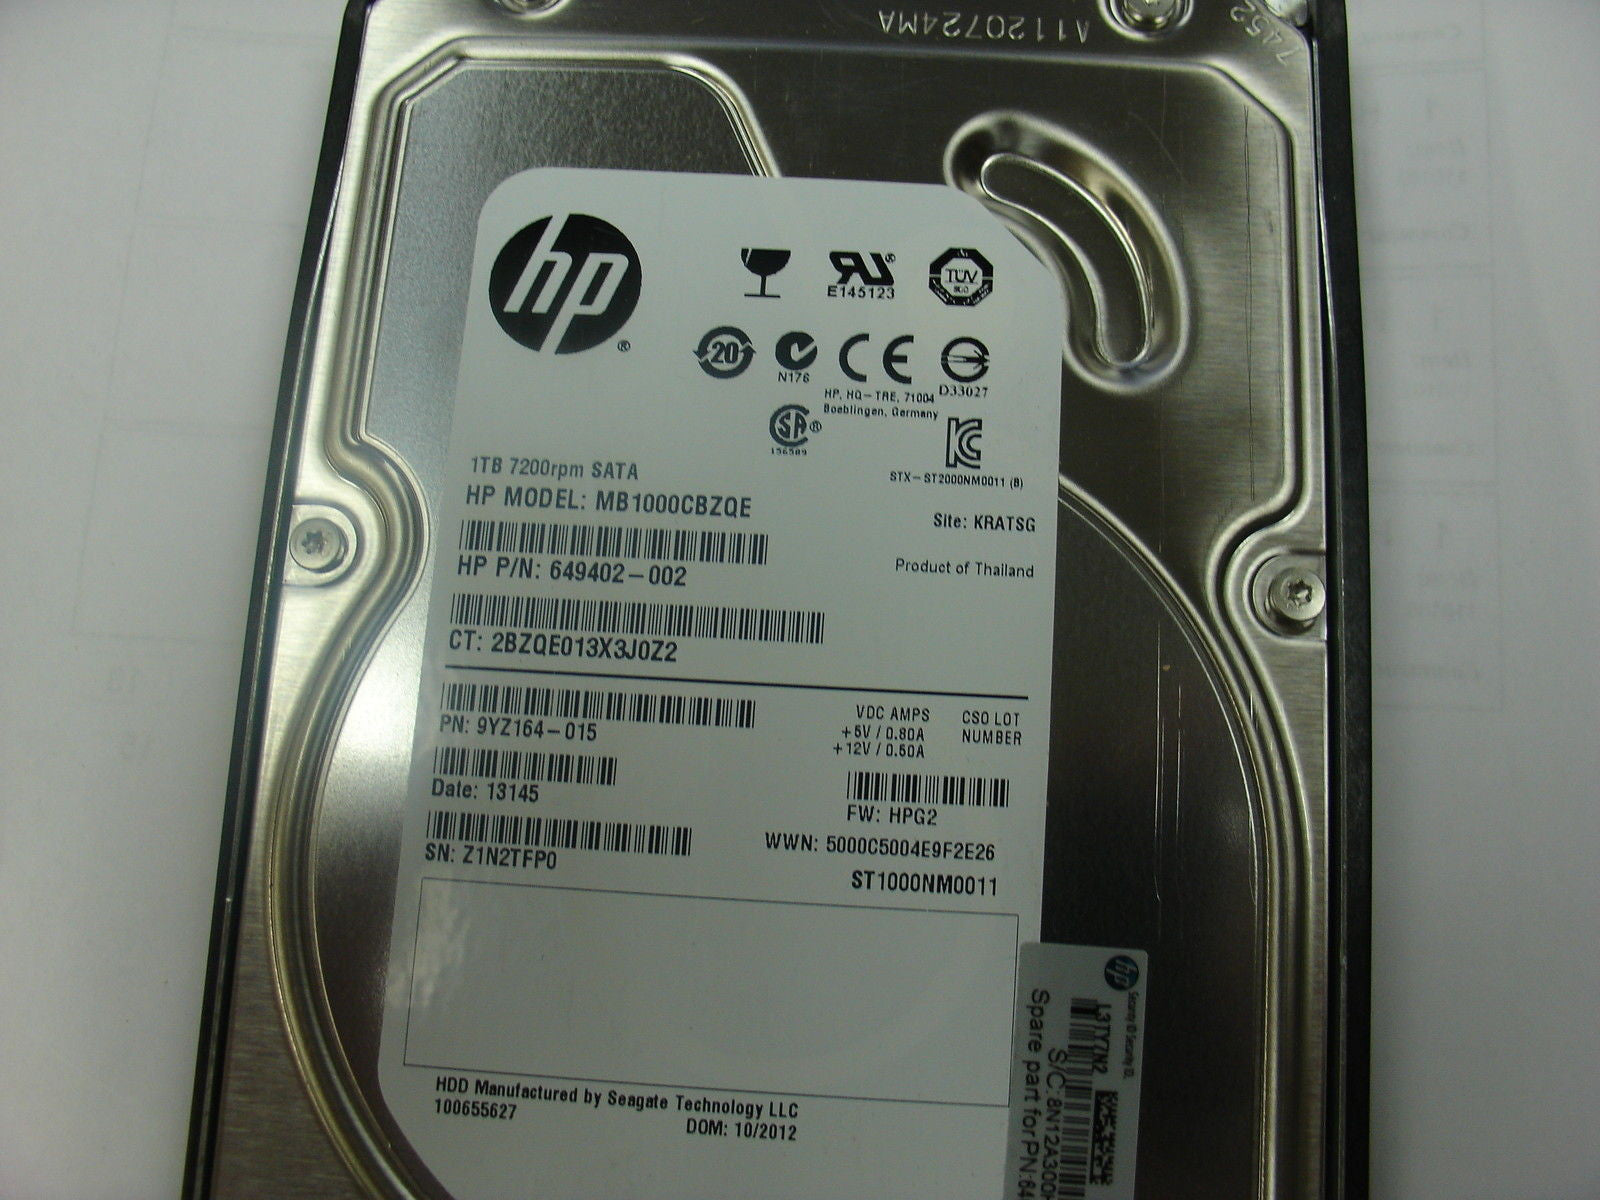 HP 649402-002 1TB 3.0GB SATA Hard Drive with Tray for MDL MB1000CBZQE - Micro Technologies (yourdrives.com)